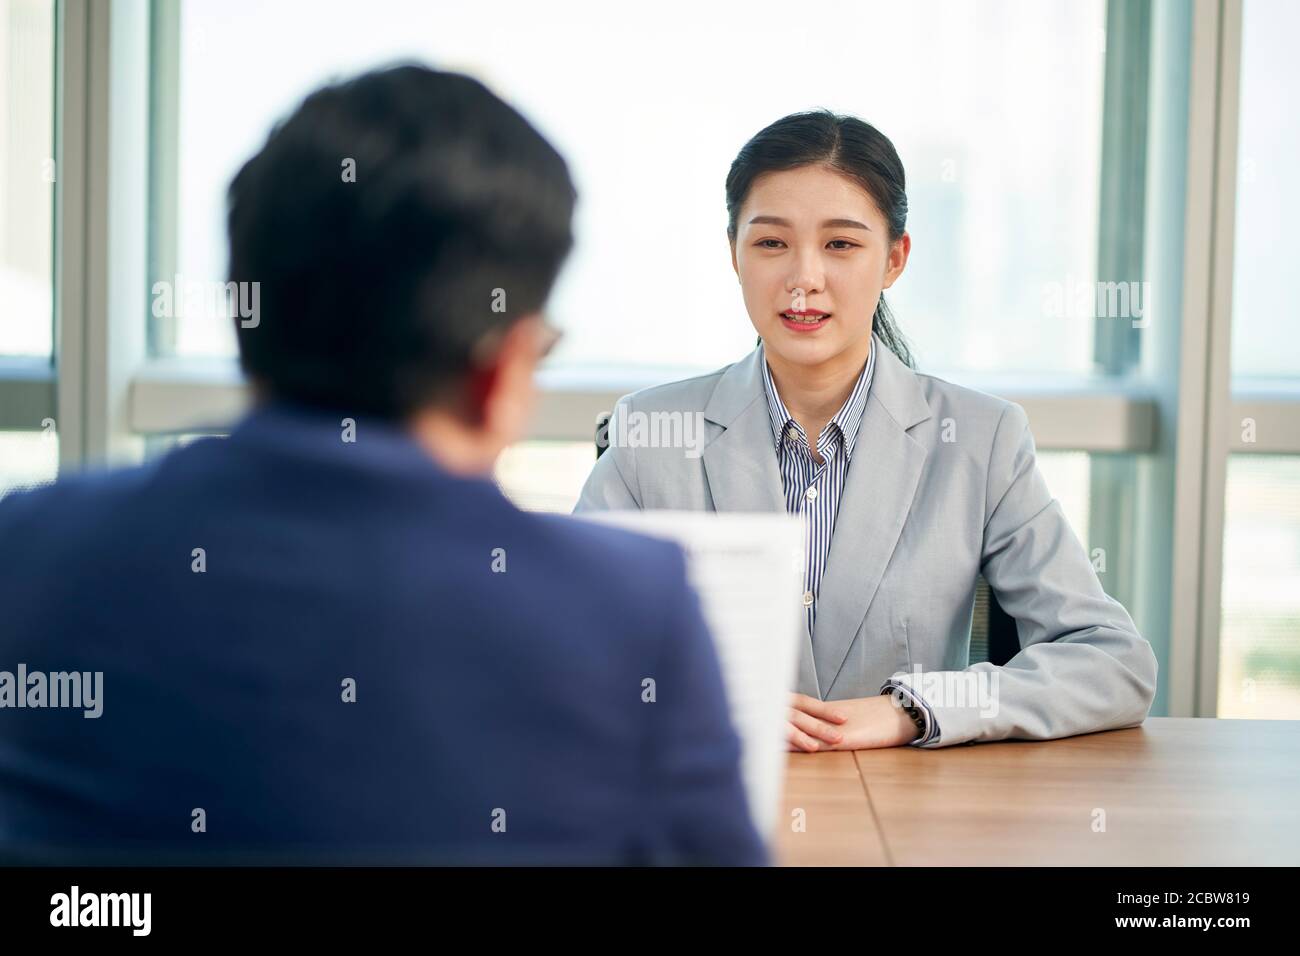 young asian business woman looking for job being interviewed by human resources manager Stock Photo